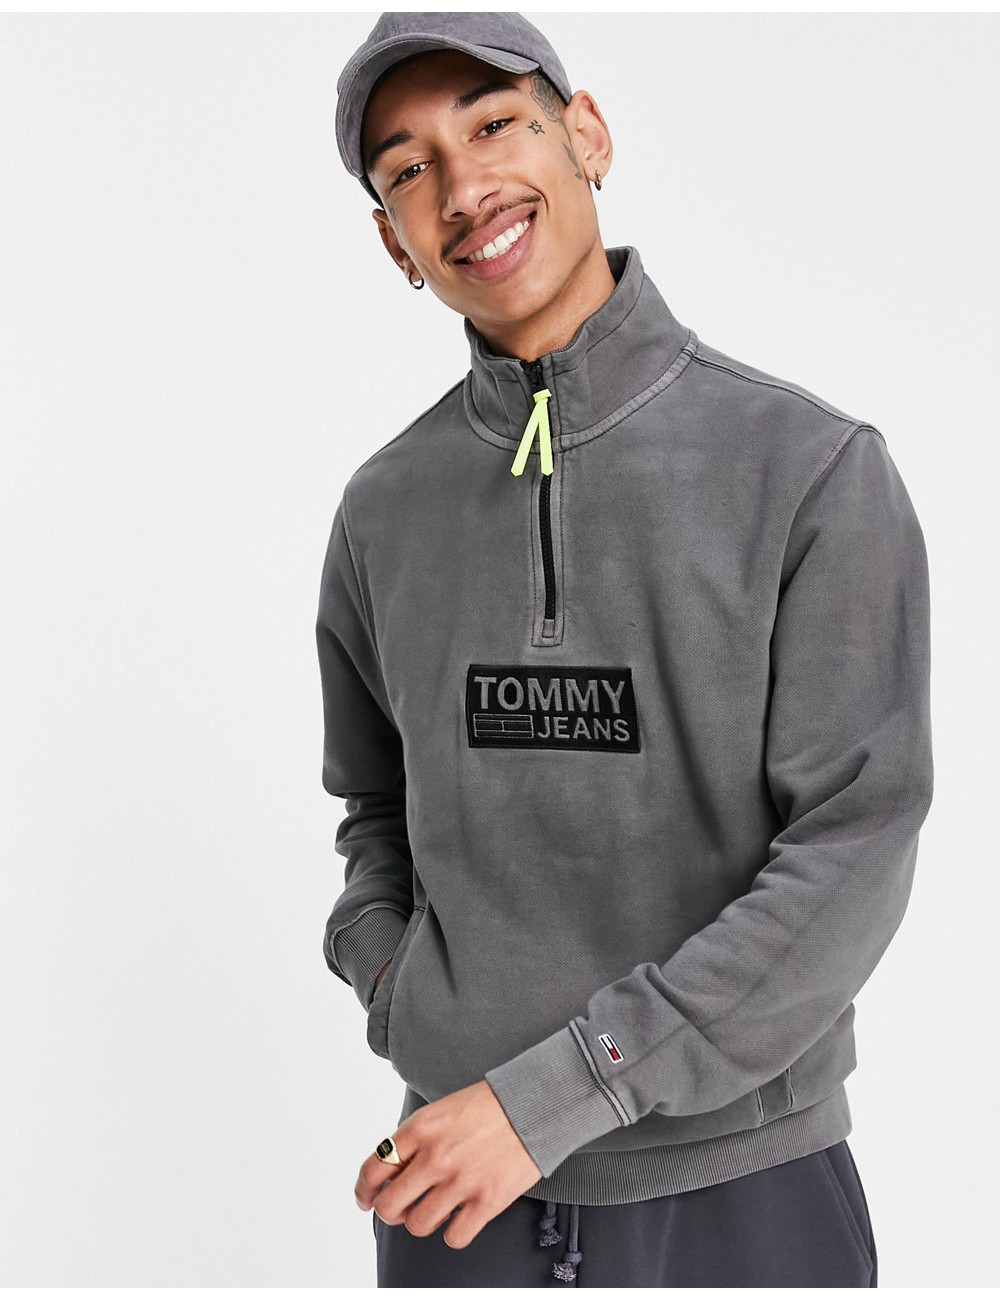 Tommy Jeans tonal corp logo...